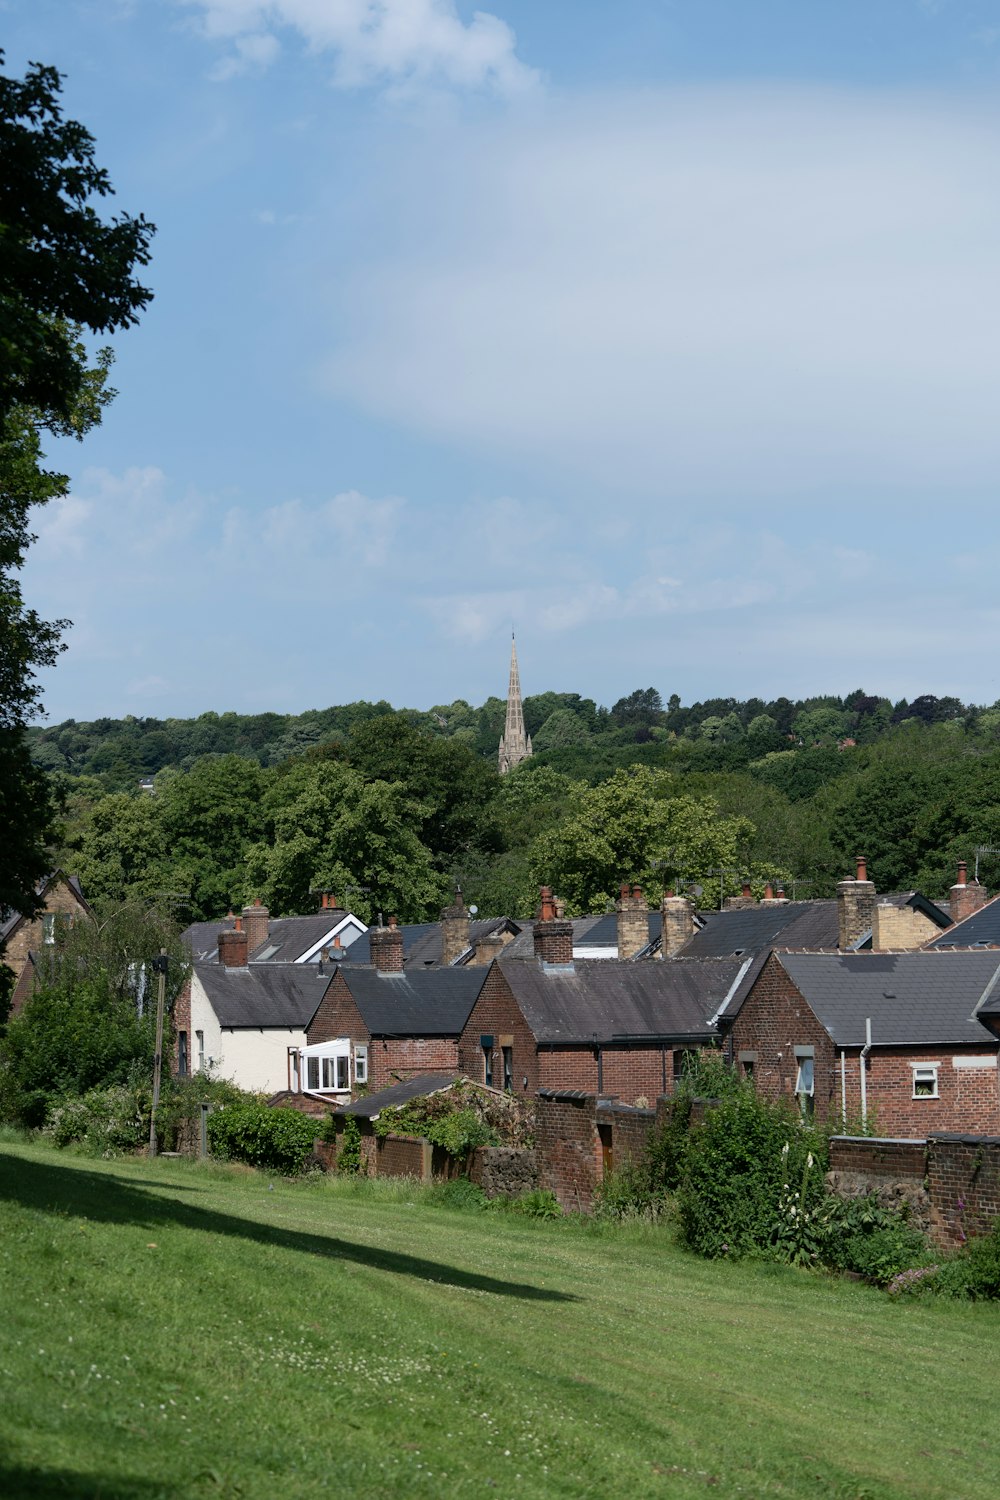 a row of houses on a hill with trees in the background